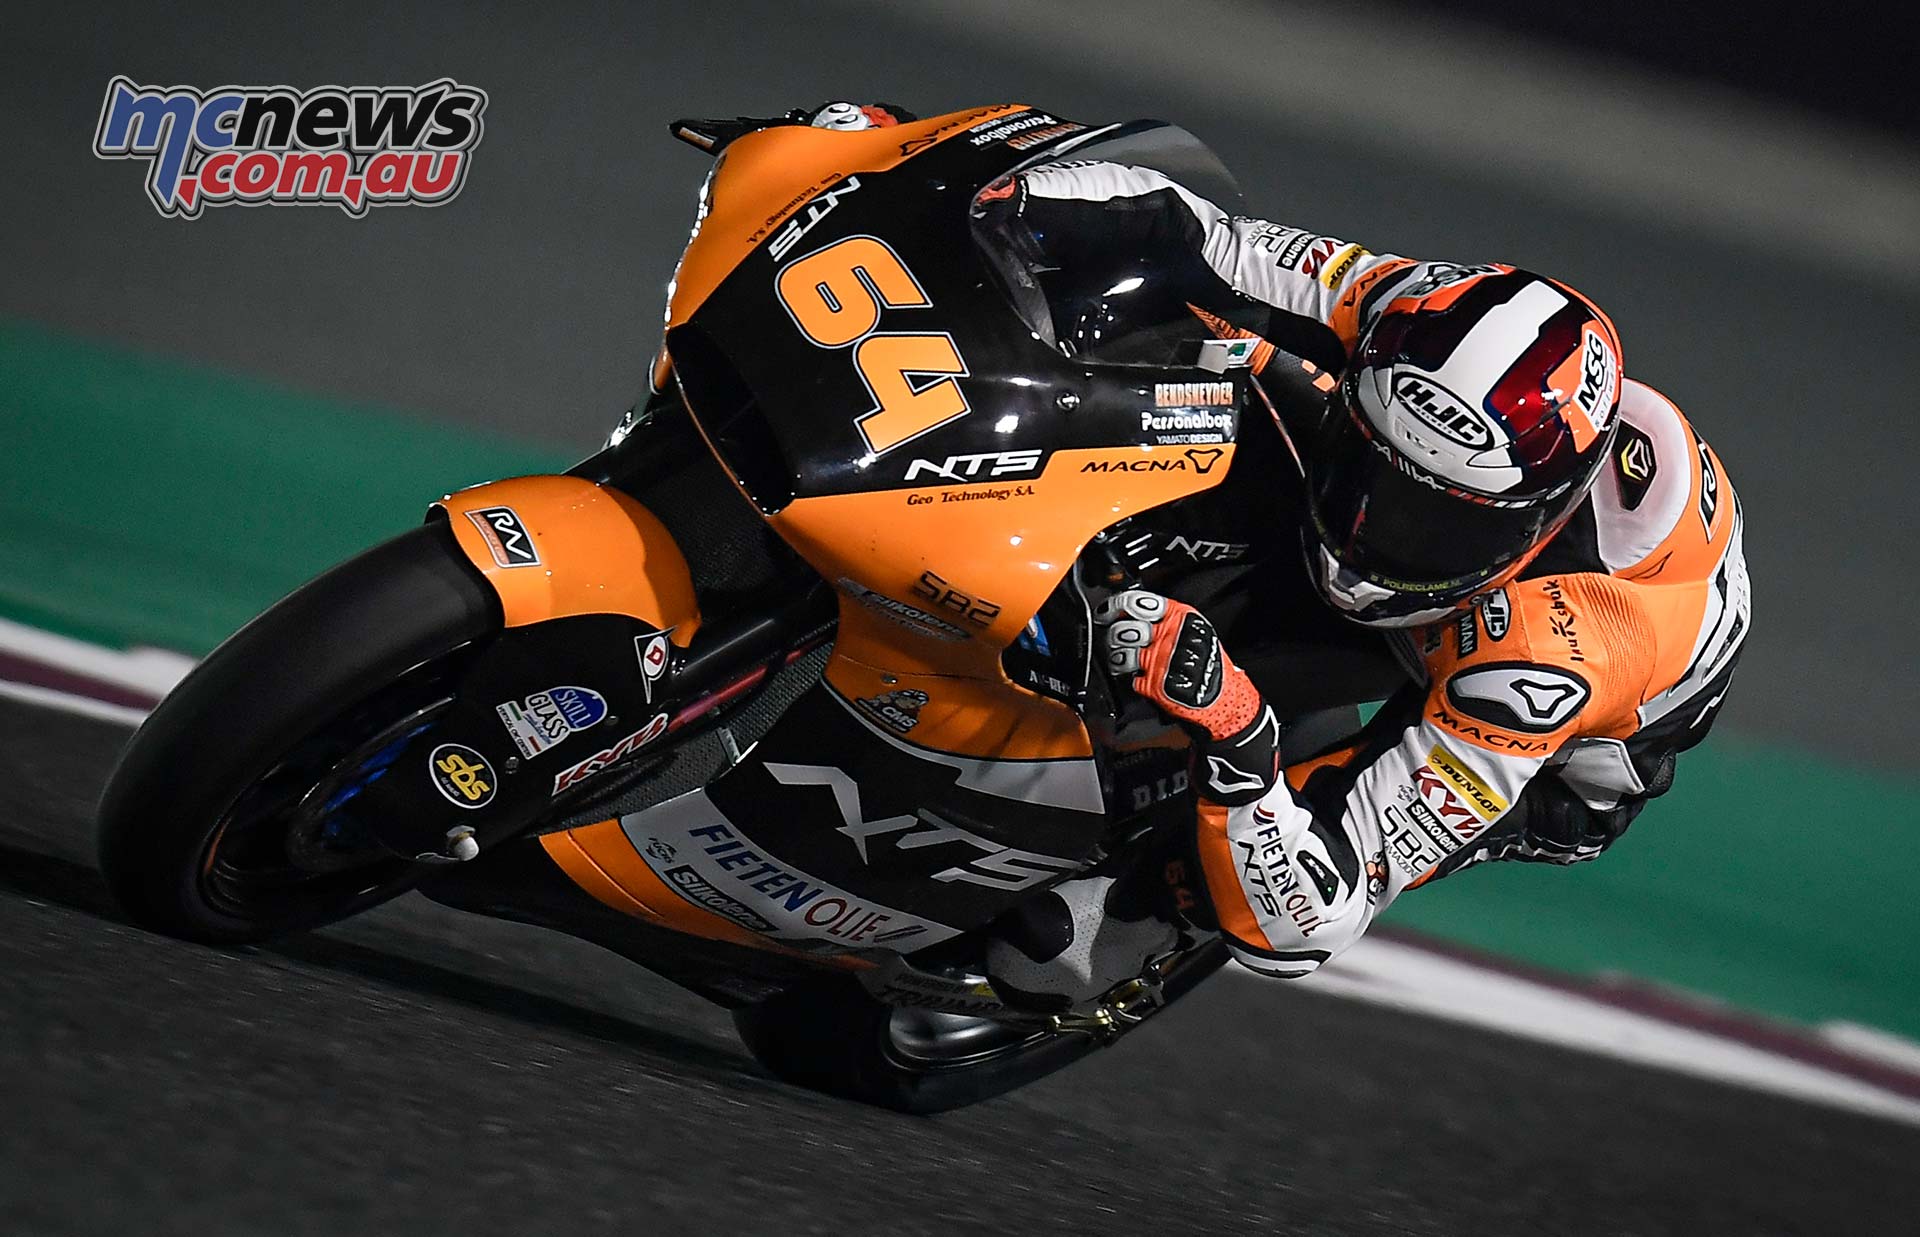 Roberts Tops Moto2 On Friday At Qatar Remy Highsides Hard Motorcycle News Sport And Reviews